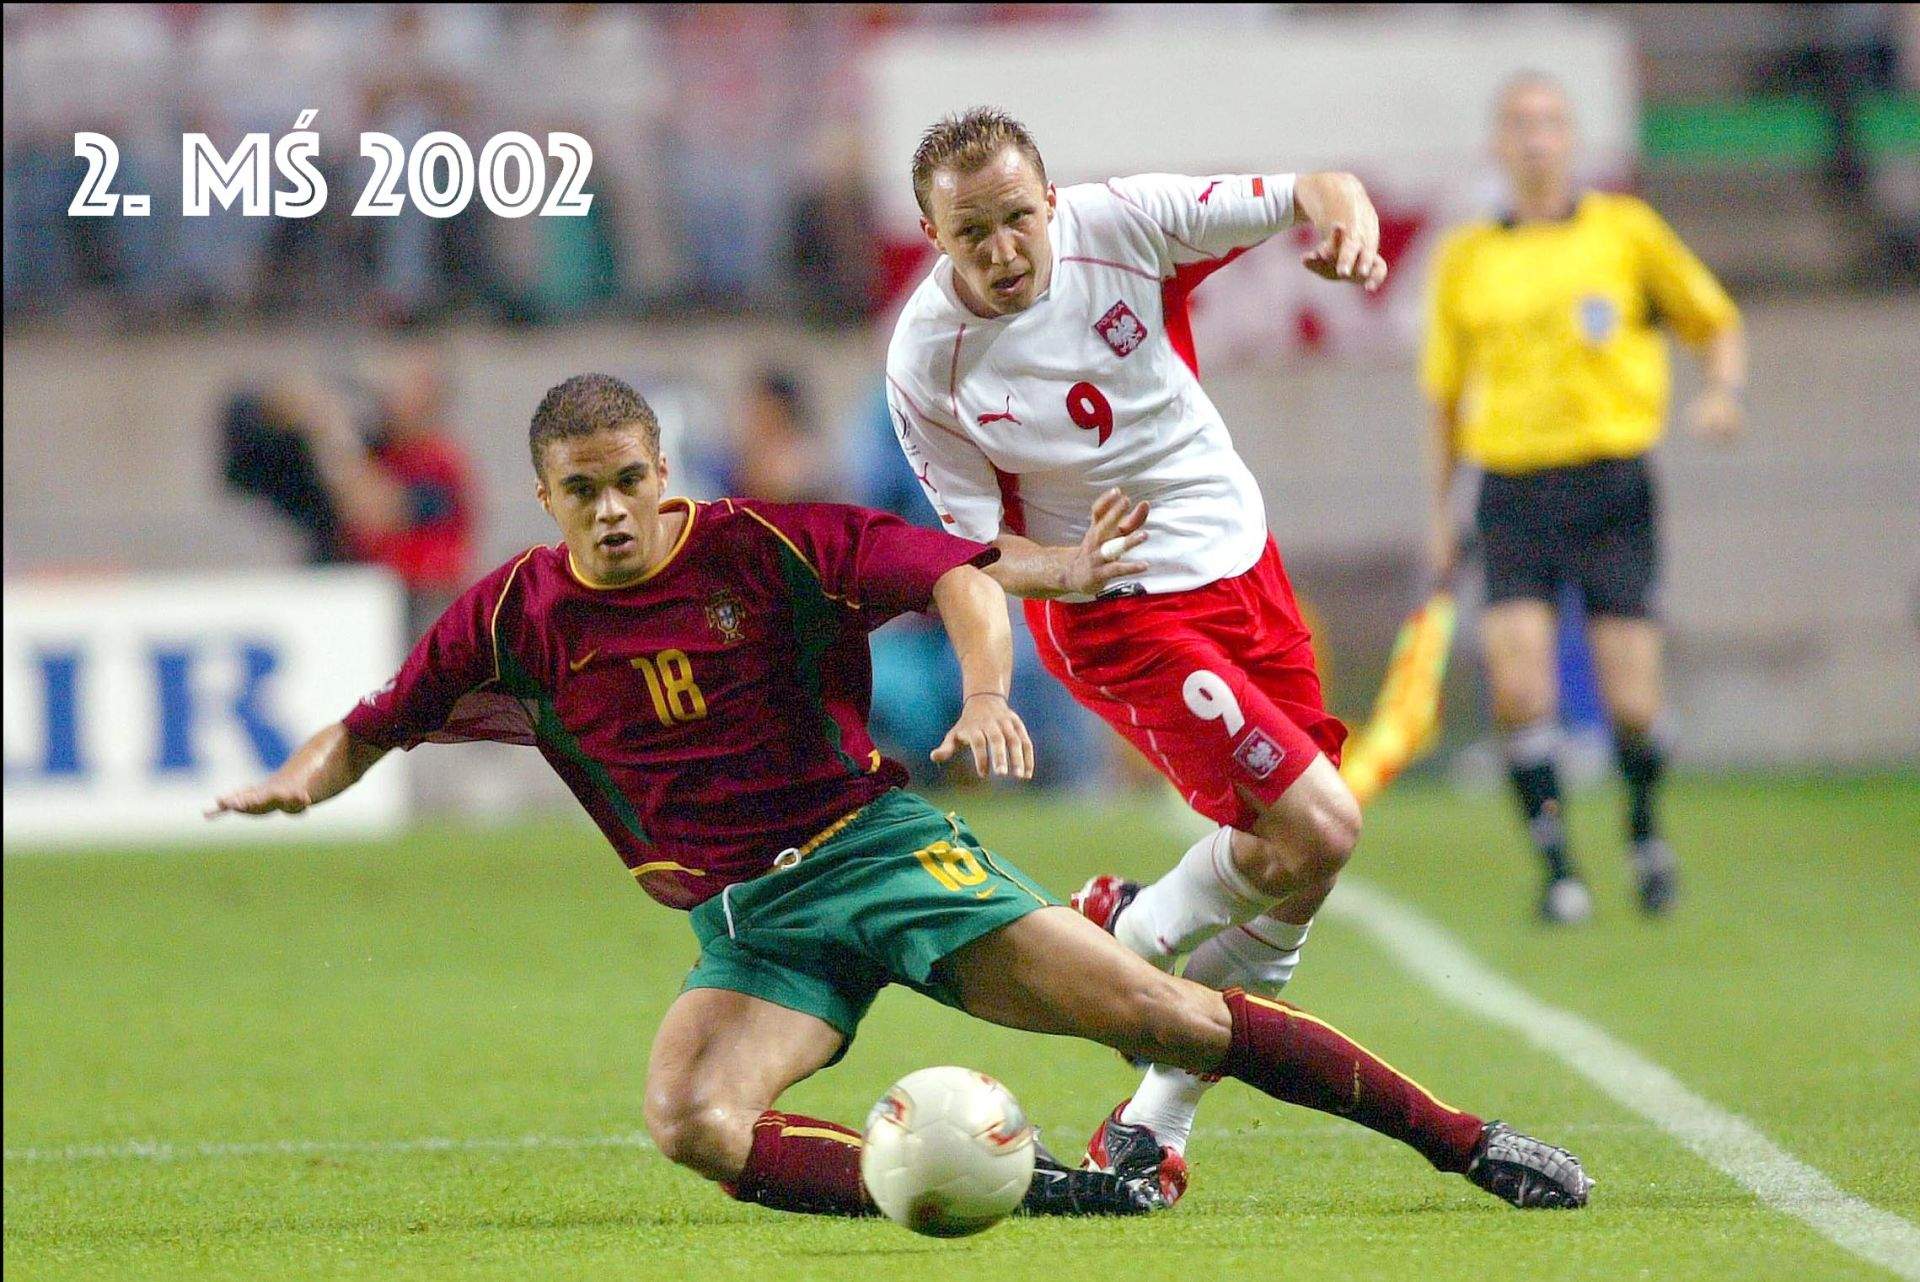 Hahn-Liewig/ABACA. 35488-9. Jeonju-South Korea, 10/06/2002. World cup 2002 . Portugal-Poland 4-0 . Pauleta led Portugal over a desperate Polish side, through a driving rainstorm, and back into the Group D race with the second hat-trick of the tournament. Pictured: Frechaud and Kryszalowicz. | 35488_09 FOT. ABACAPRESS.COM / NEWSPIX.PL POLAND ONLY !!! --- Newspix.pl